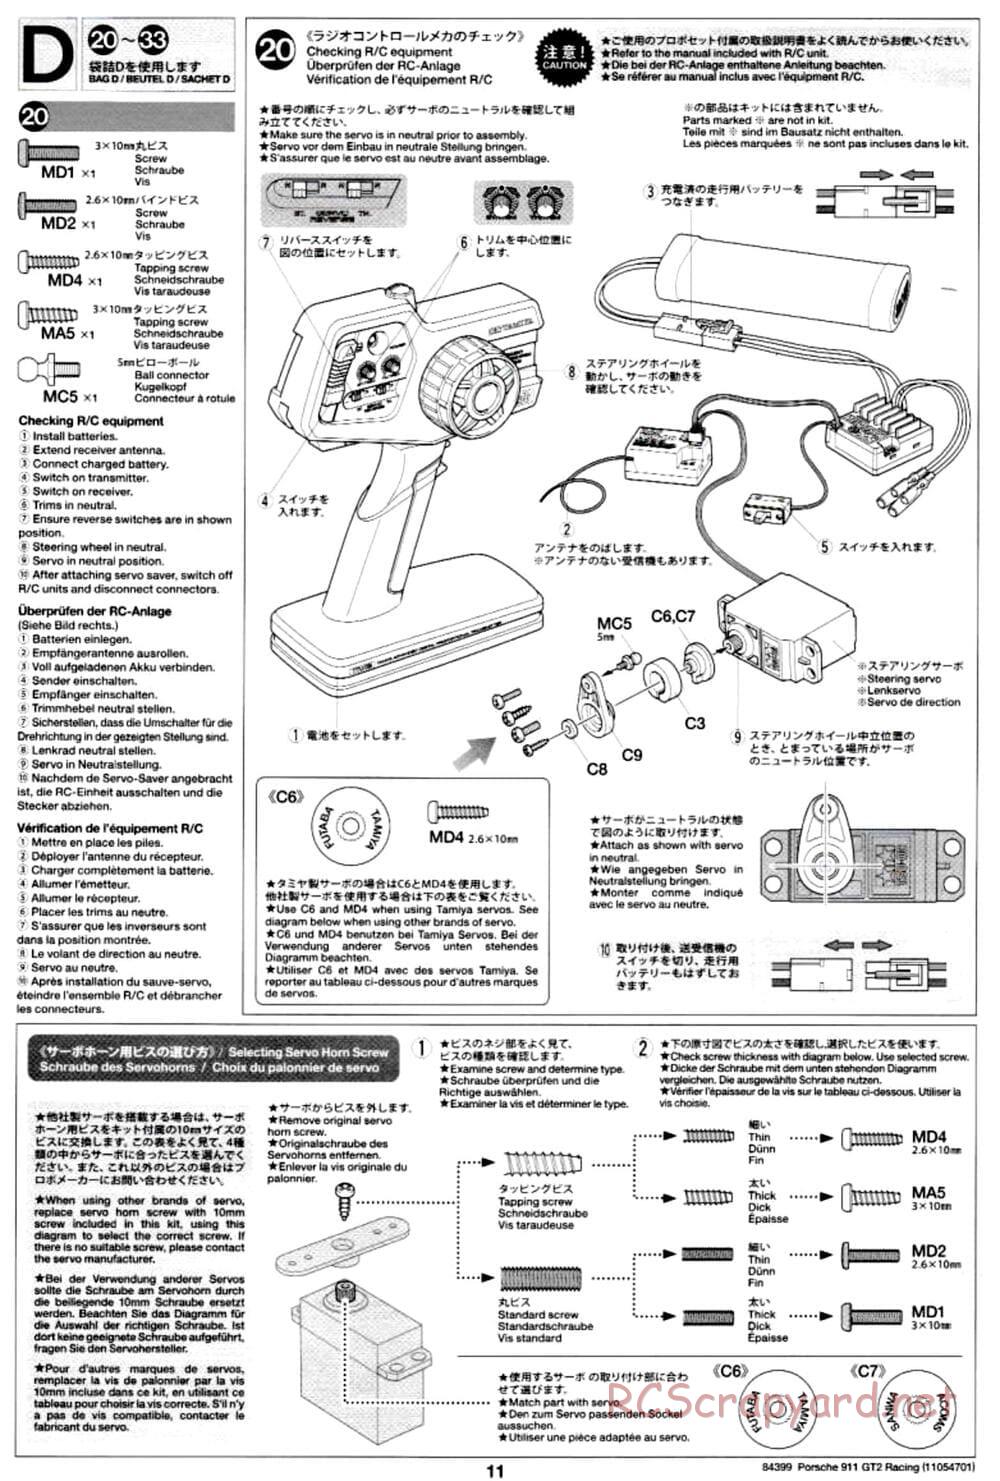 Tamiya - Porsche 911 GT2 Racing - TA02SW Chassis - Manual - Page 11